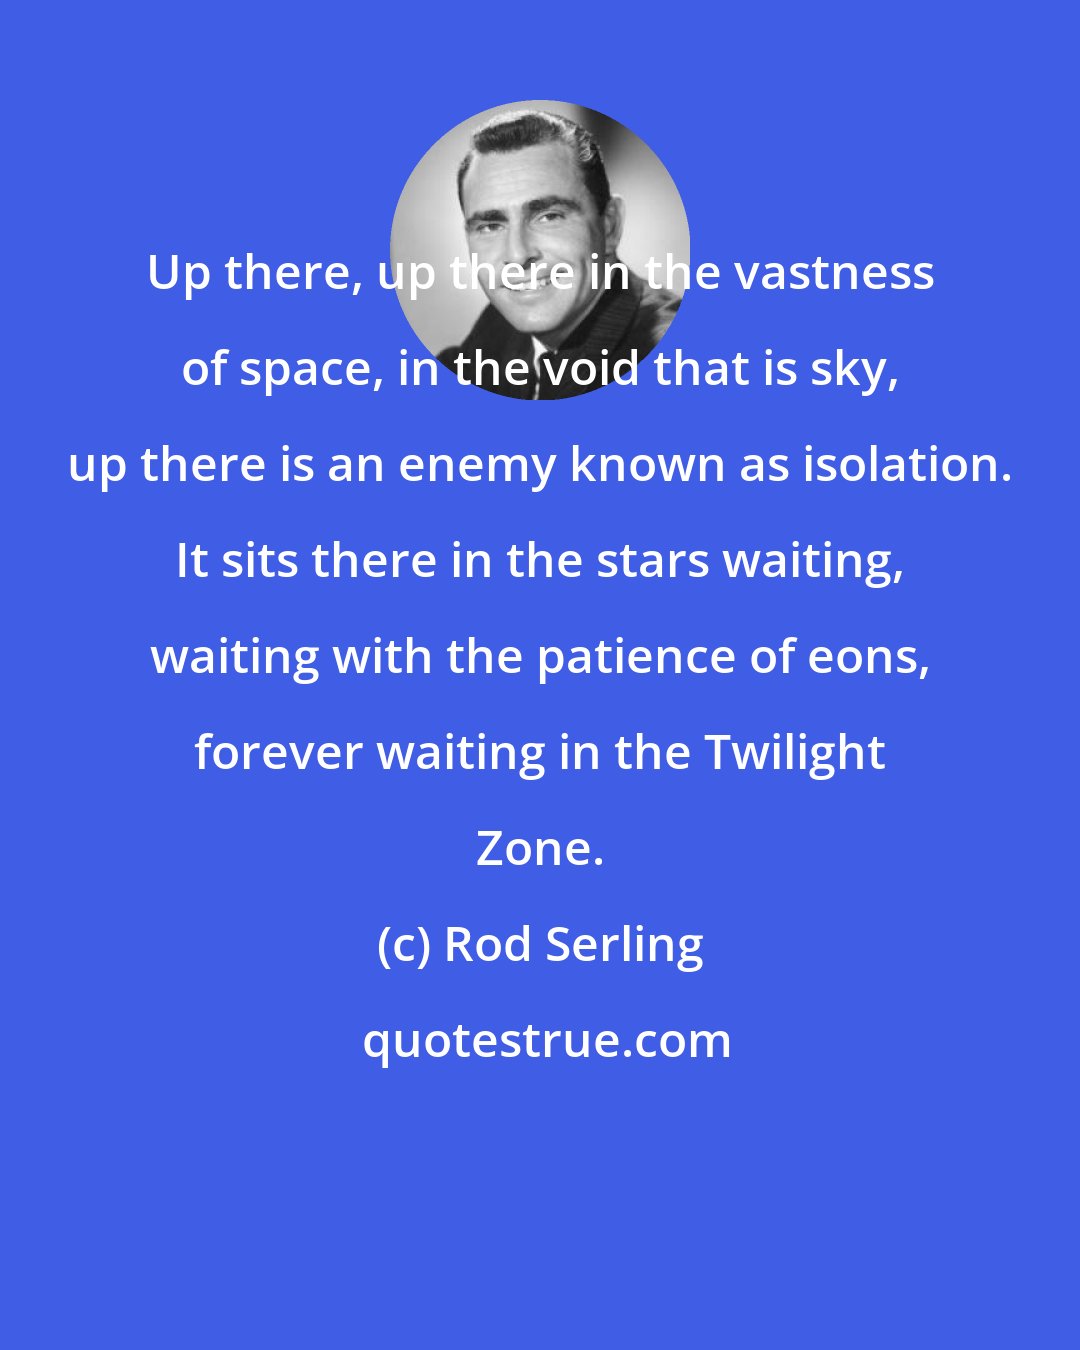 Rod Serling: Up there, up there in the vastness of space, in the void that is sky, up there is an enemy known as isolation. It sits there in the stars waiting, waiting with the patience of eons, forever waiting in the Twilight Zone.